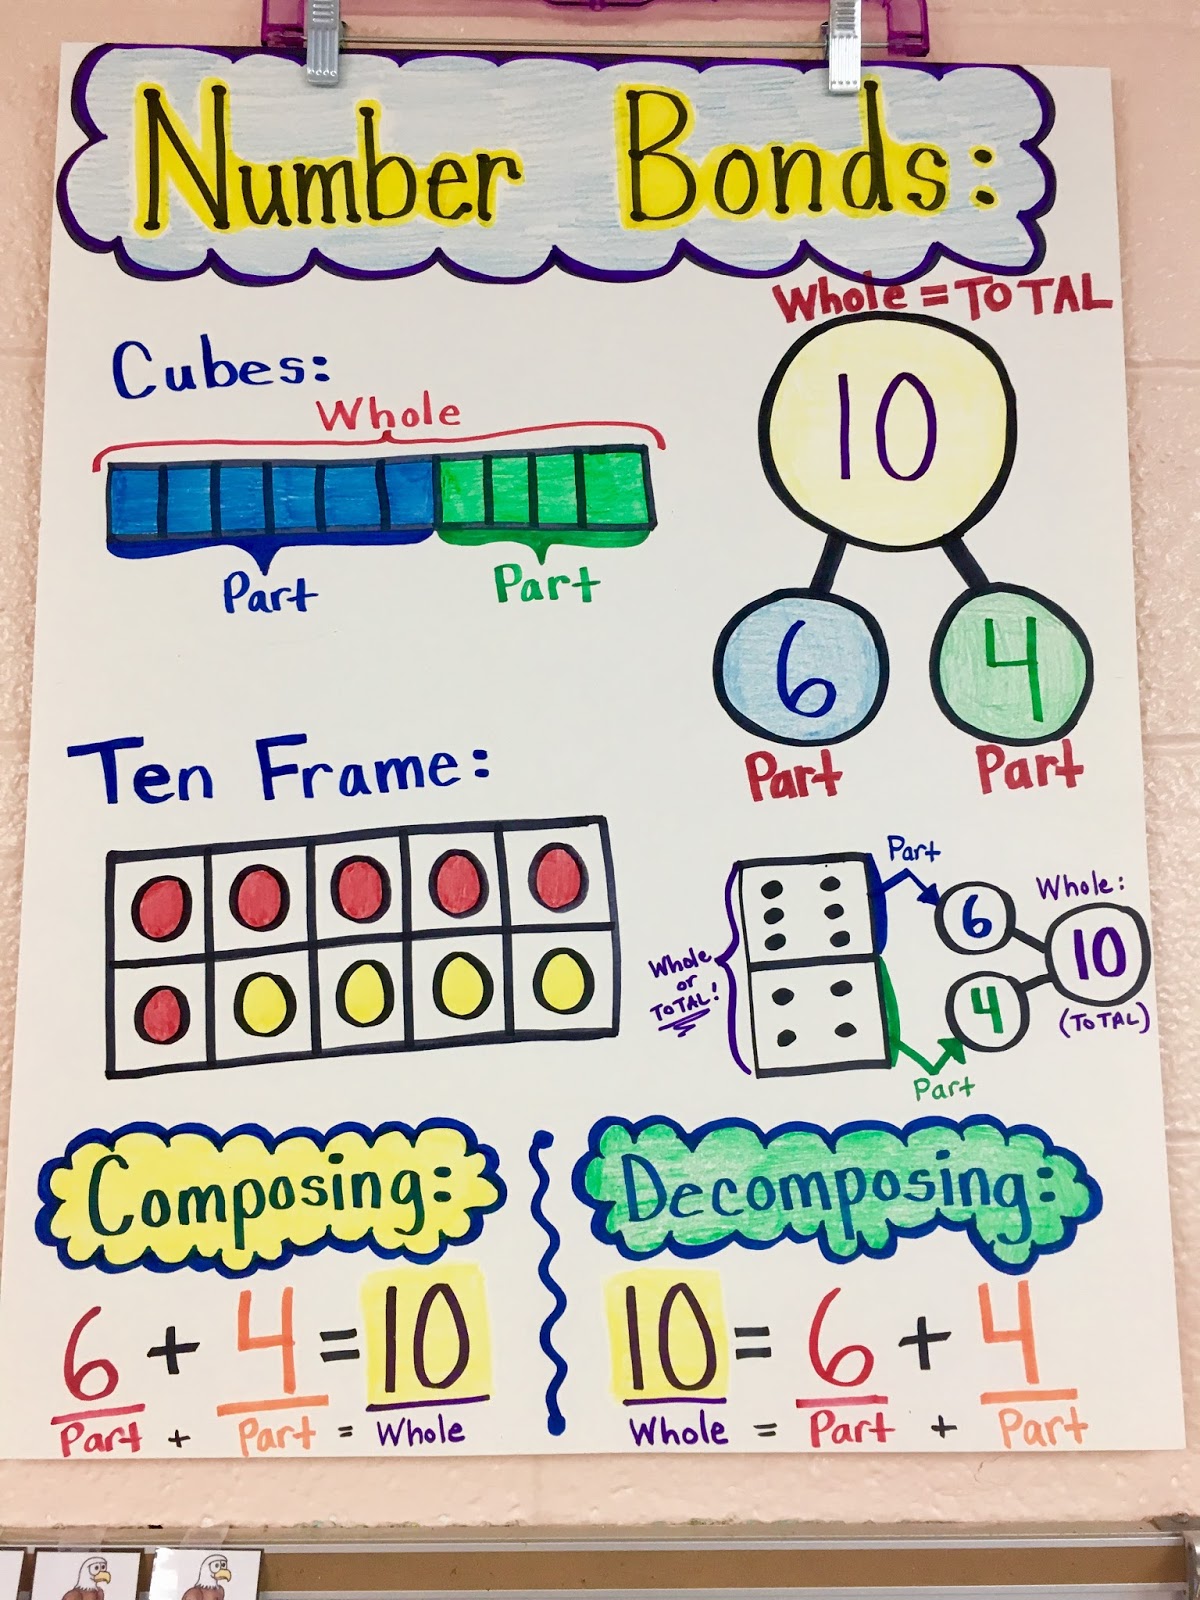 LIVIN' IN A VAN DOWN BY THE RIVER: Number Bonds Anchor Chart